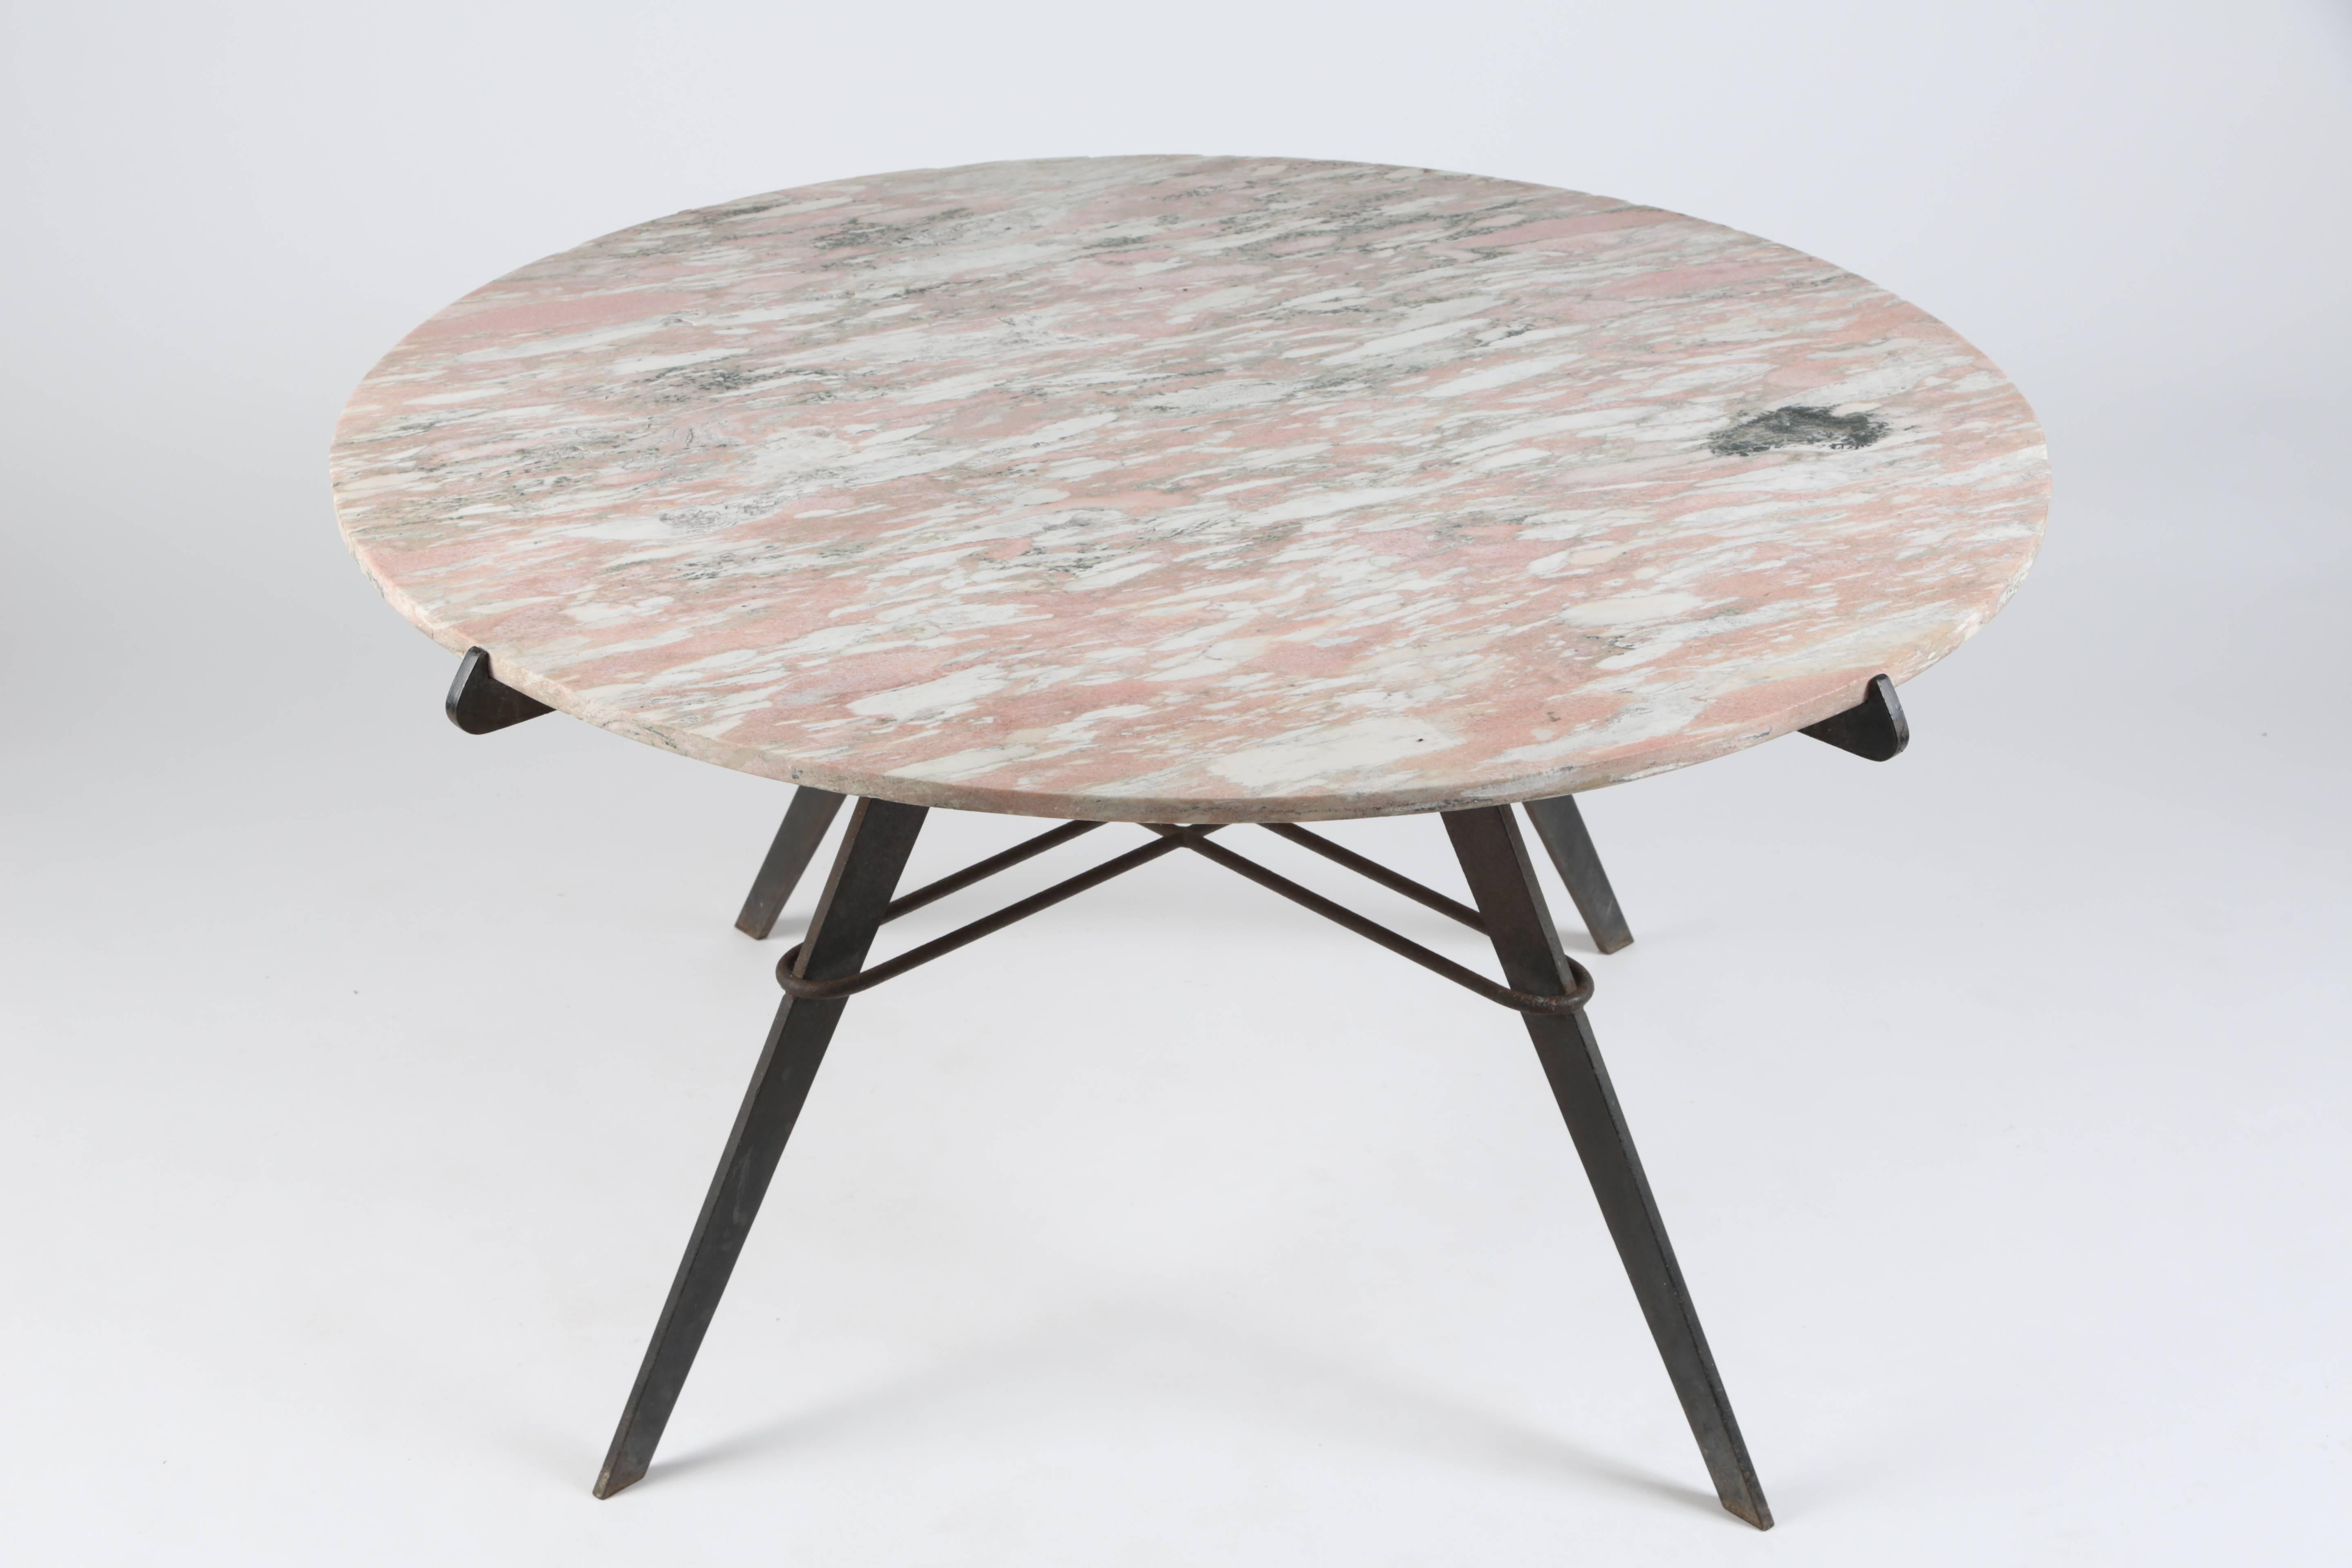 Forged Iron Table with Marble Top by William 